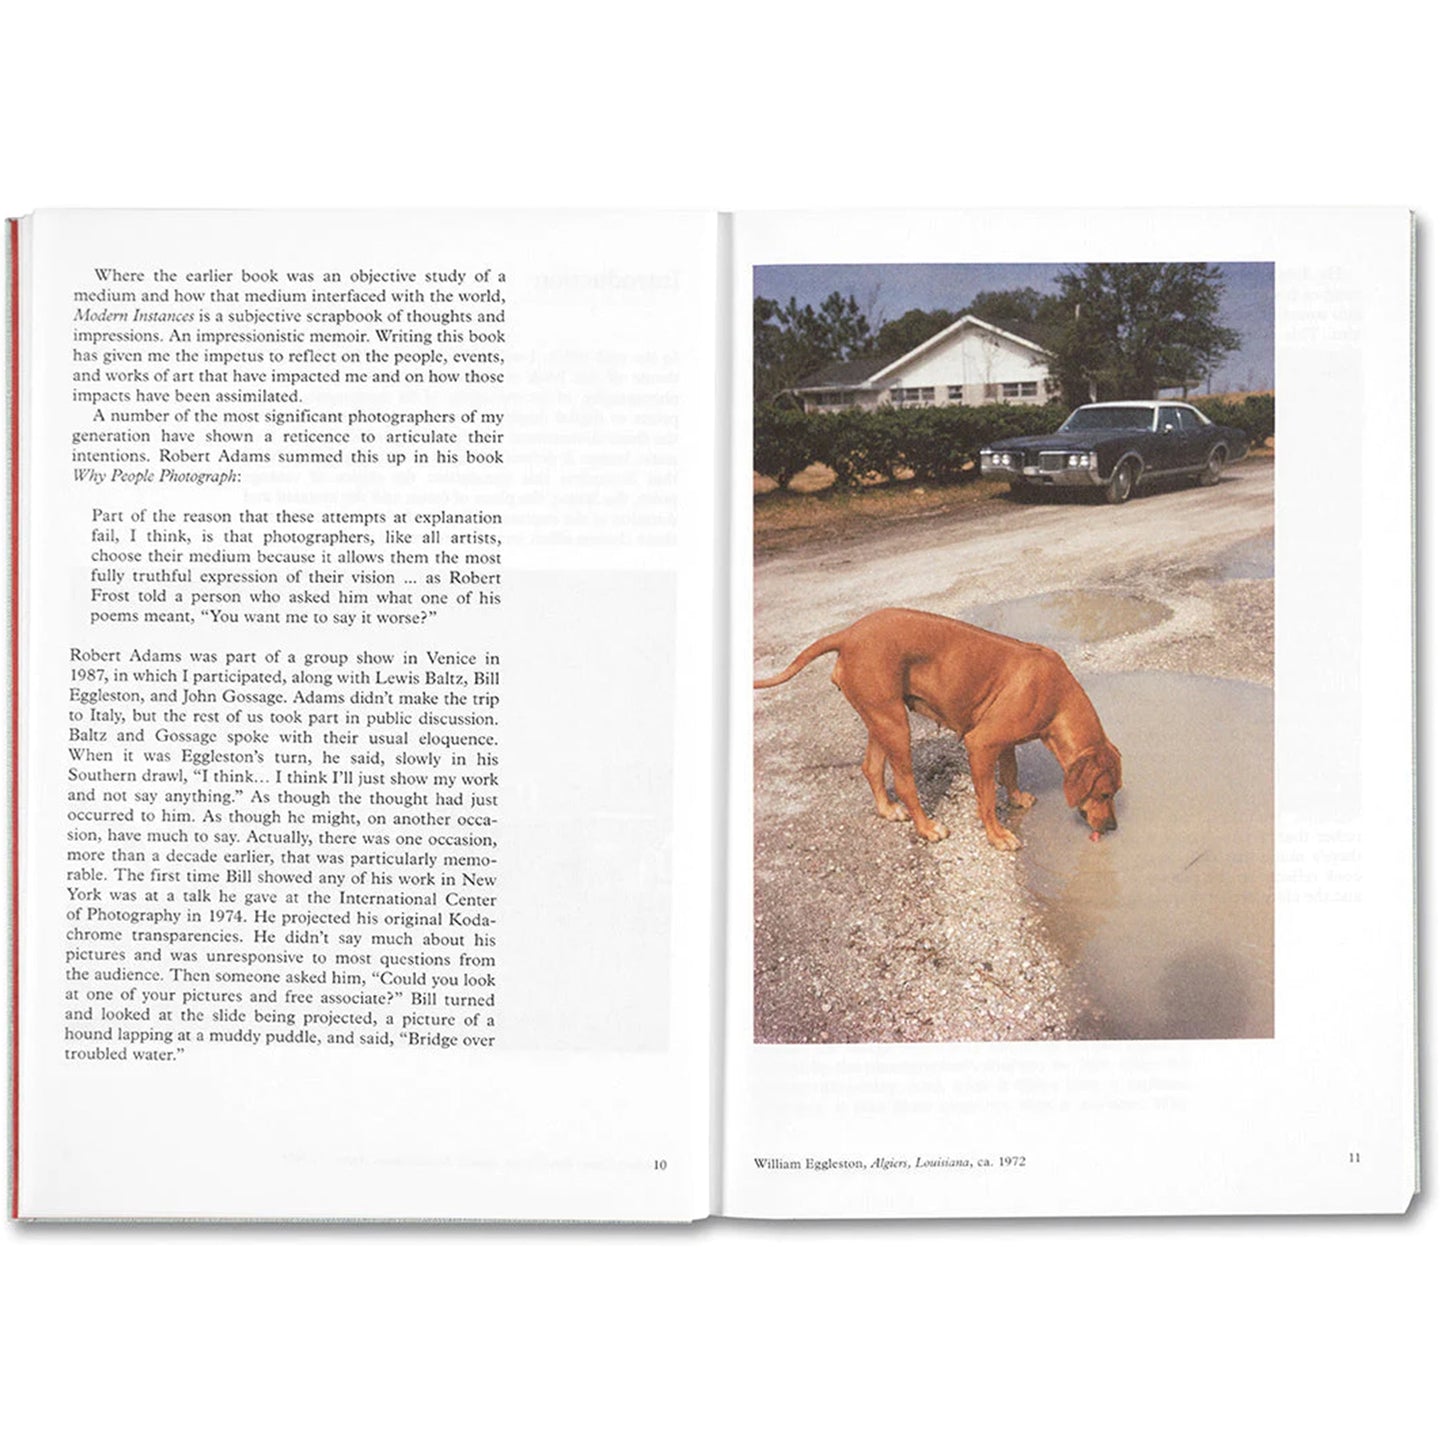 Modern Instances: The Craft of Photography by Stephen Shore